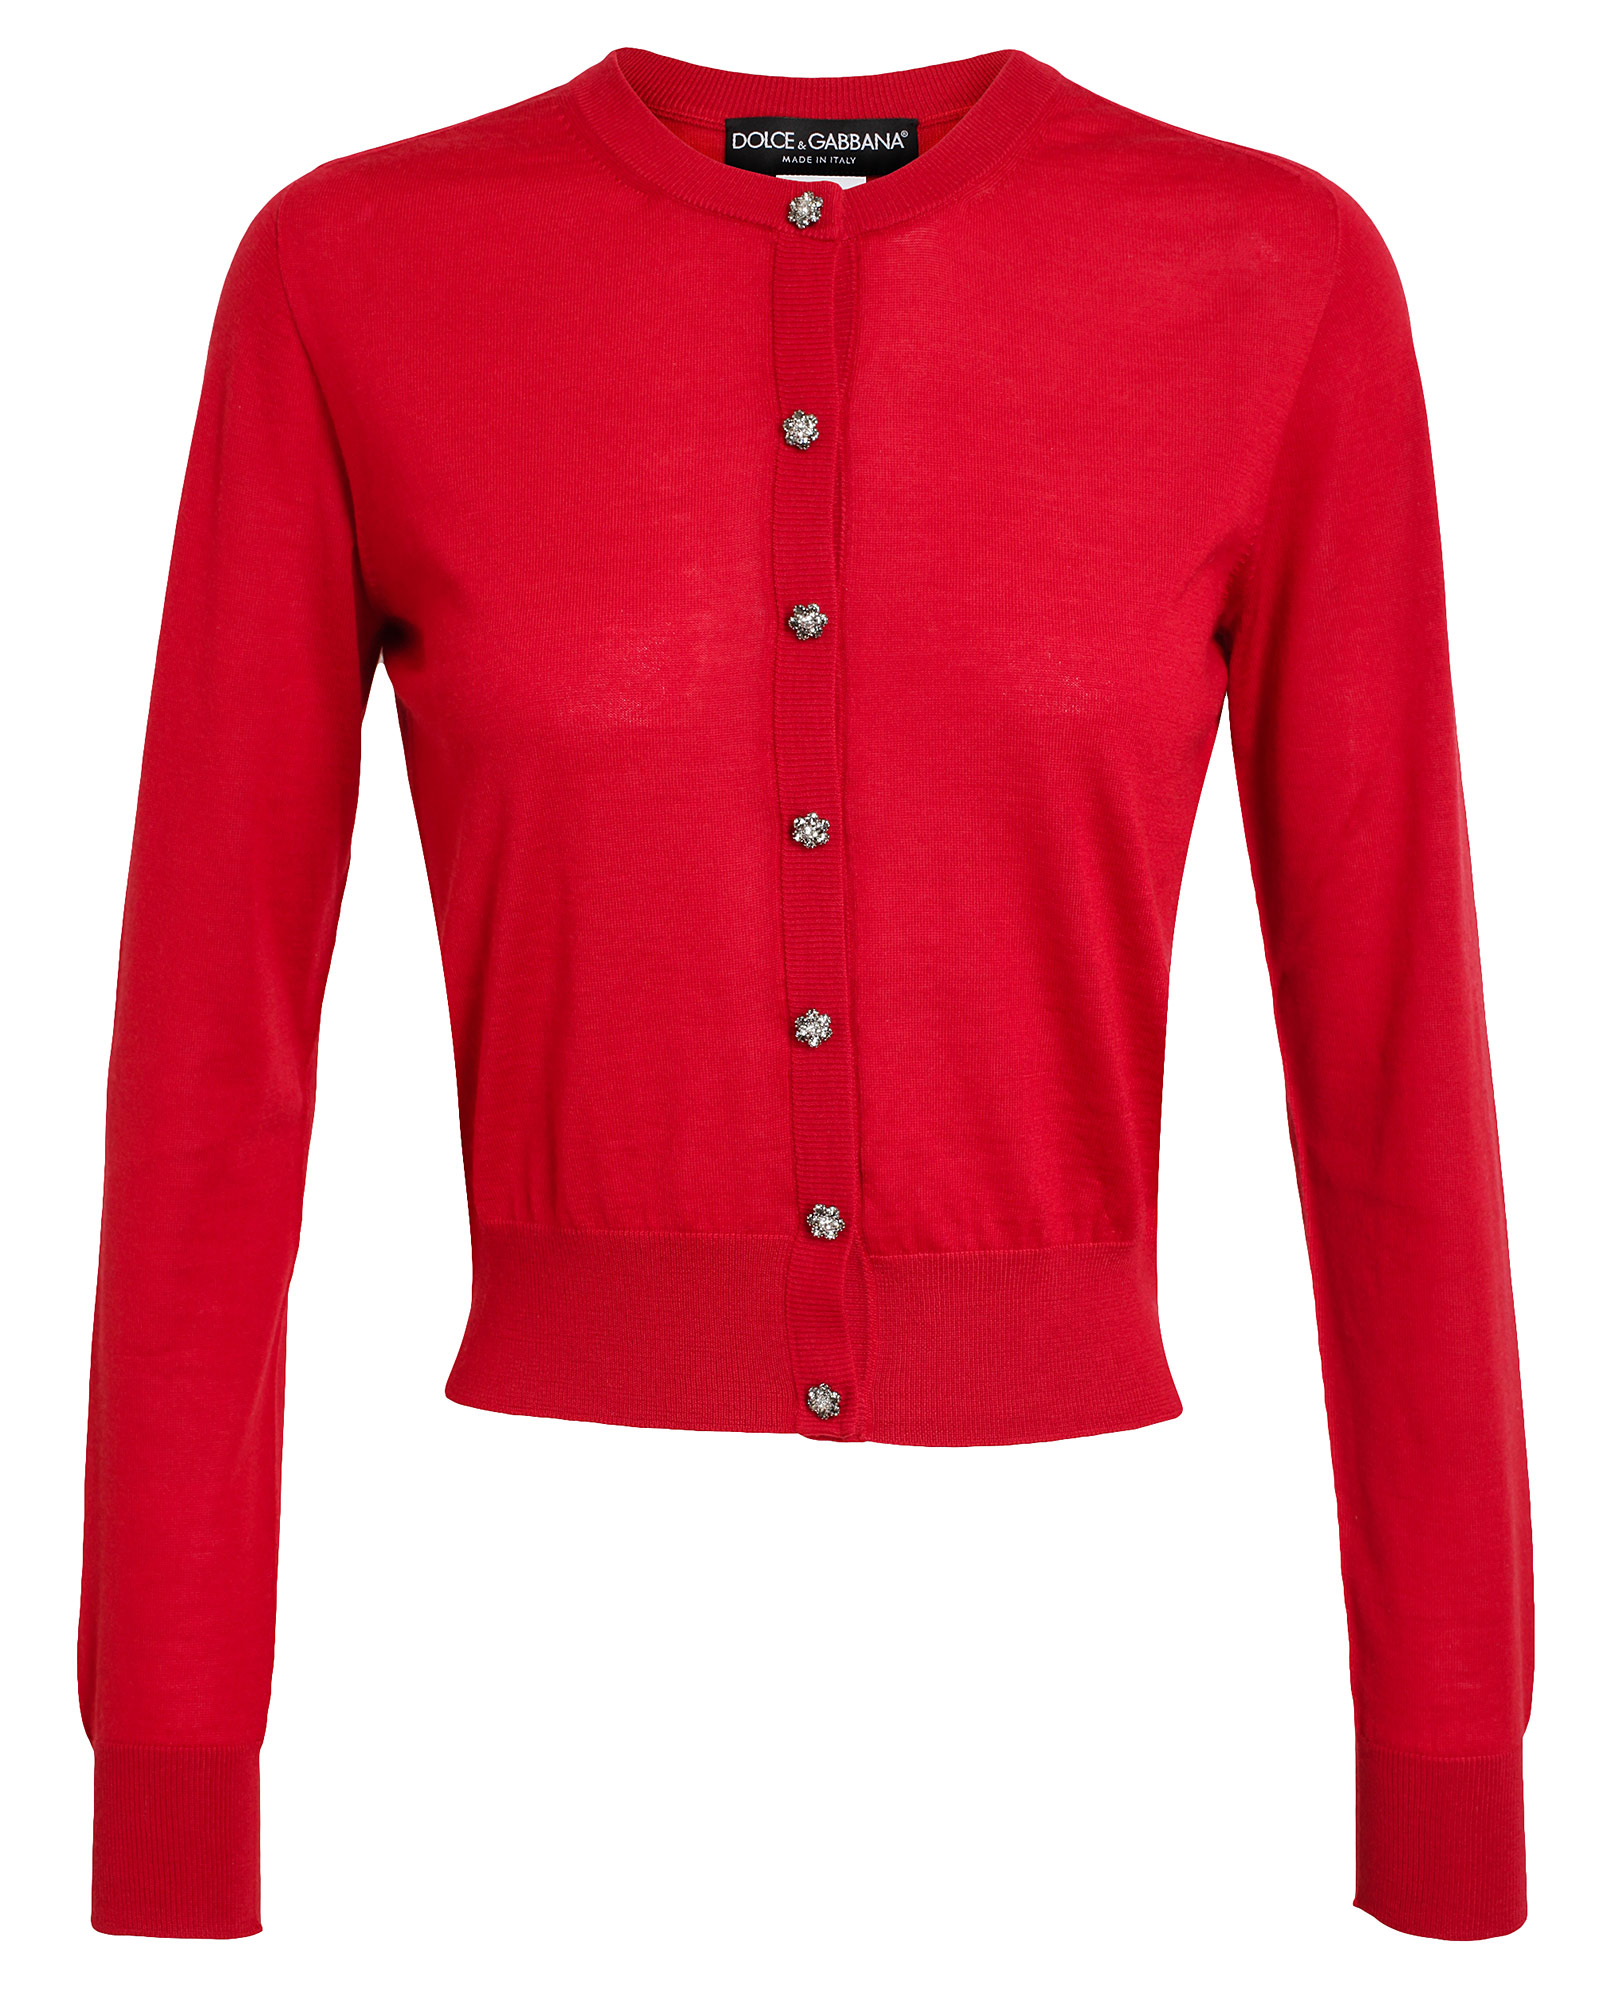 Dolce & Gabbana Cropped Knitted Cardigan in Red | Lyst